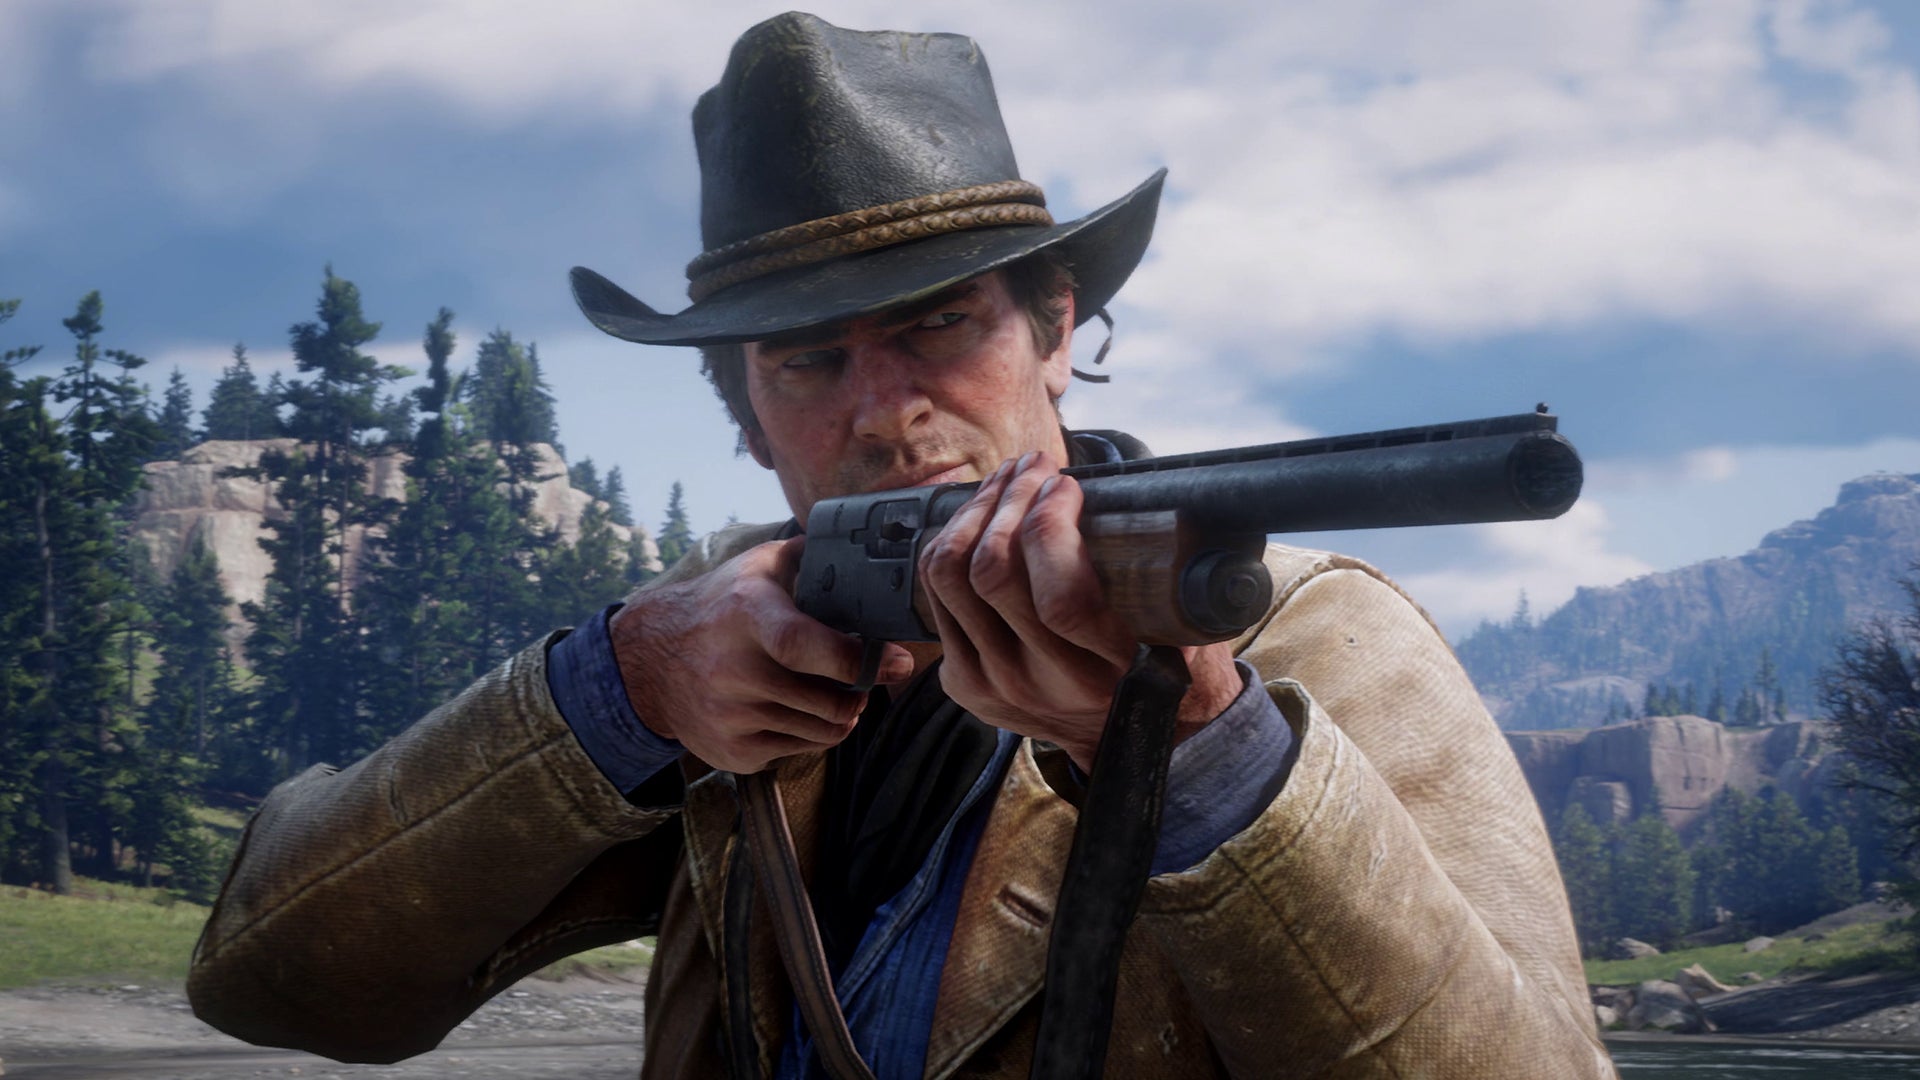 Image for Red Dead Redemption 2 PS4 Pro First Look: Gameplay Trailer Analysis!